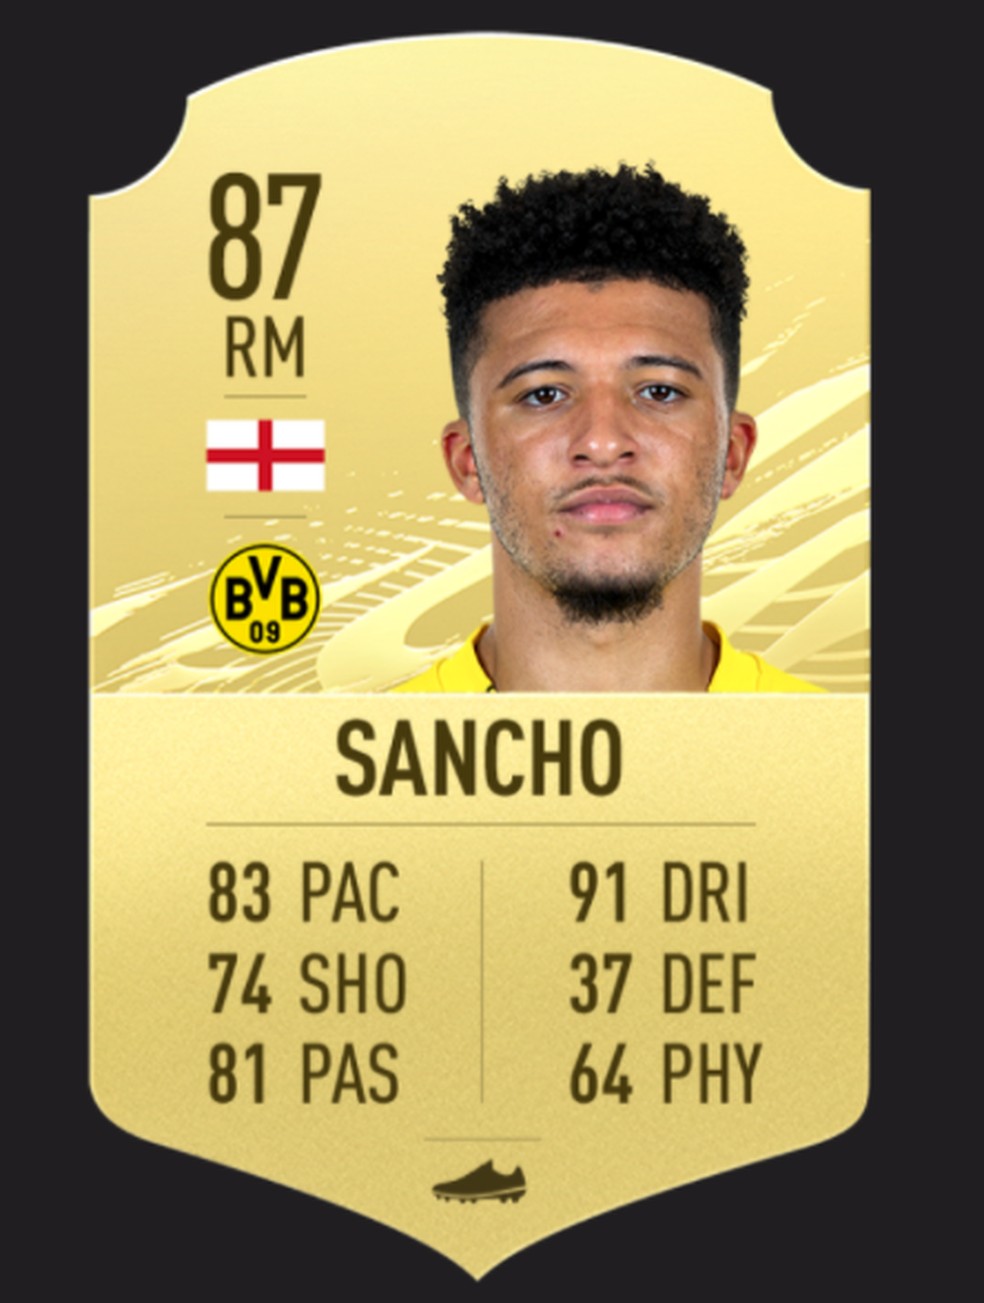 Sancho had the best year of his career by scoring 20 goals and 19 assists over his 44 appearances. (Image: EA Sports)